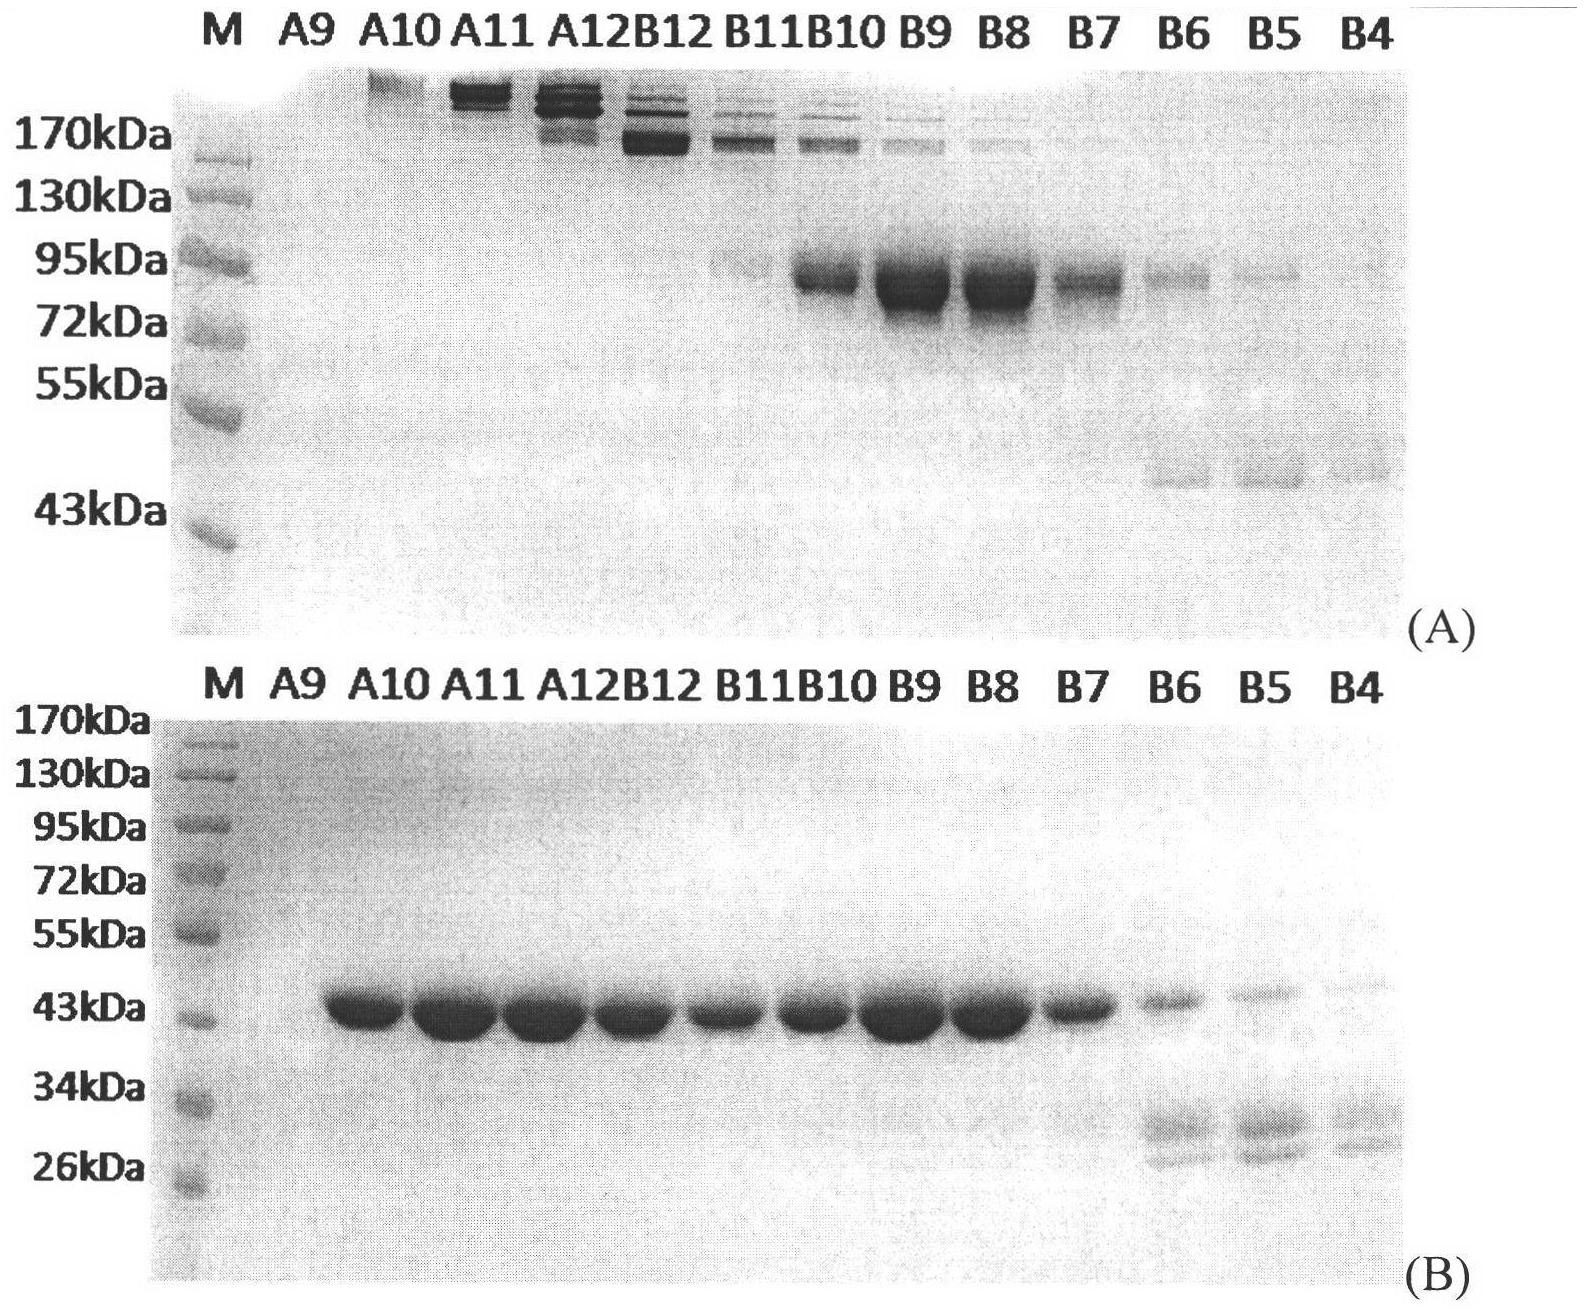 Experimental technique for recombinant fusion protein (VEGF121-FC) of human vascularendothelial growth factor (VEGF) 121 and immunoglobulin Fc fragment